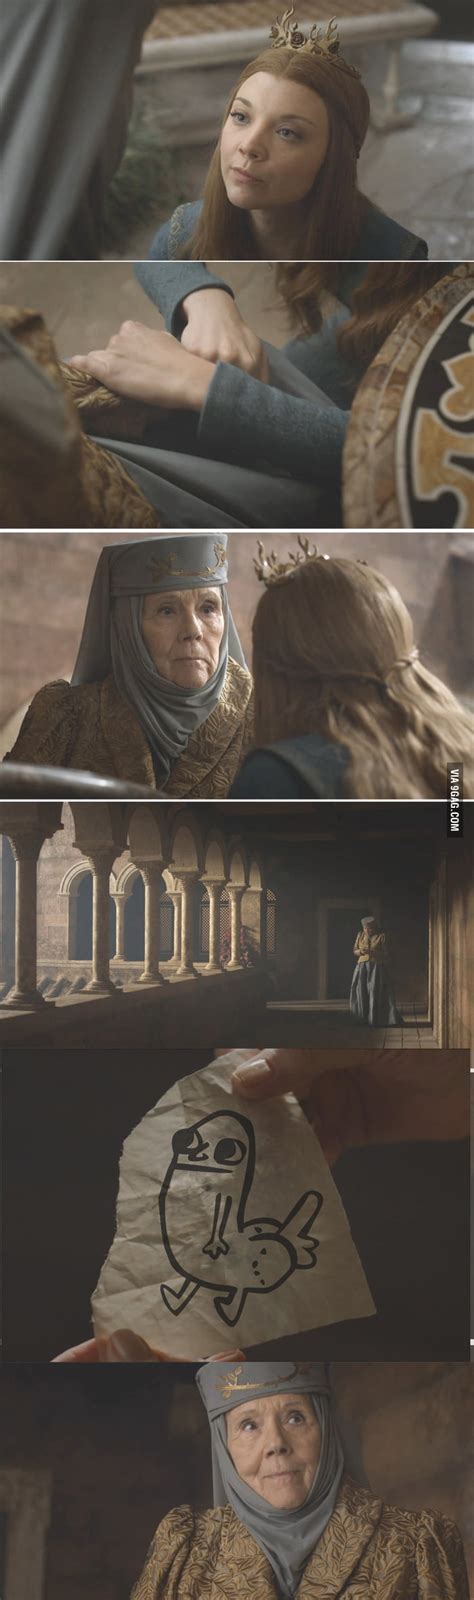 her face is priceless 9gag